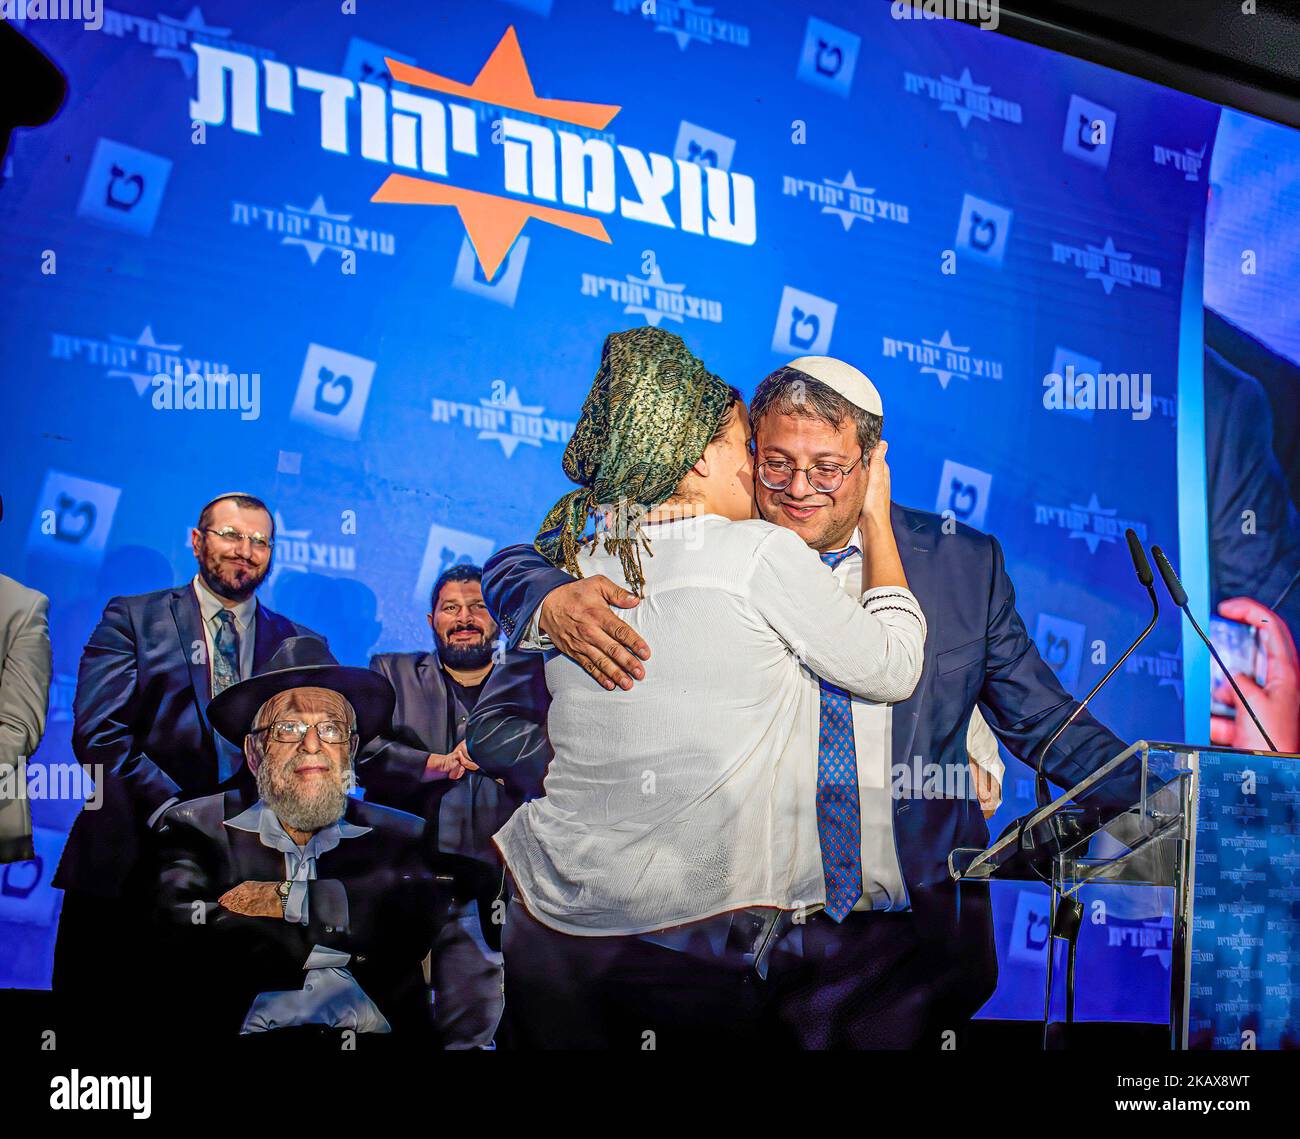 Jerusalem, Israel. 02nd Nov, 2022. Leader of the ultranationalist party Otzma Yehudity ( Jewish Strength ) Itamar Ben-Gvir and his wife Ayalah in Jerusalem after hearing the results of the exit polls giving his party 14 seats in the parliament. With more than 90% of the votes counted former Israeli Prime Minister Benjamin Netanyahu and his block of parties are set to win 65 seats out of the 120 seat Parliament. A come back for Netanyahu, the religious and extreme right nationalist block that he leads. (Photo by Eyal Warshavsky/ SOPA Images/Sipa USA) Credit: Sipa USA/Alamy Live News Stock Photo